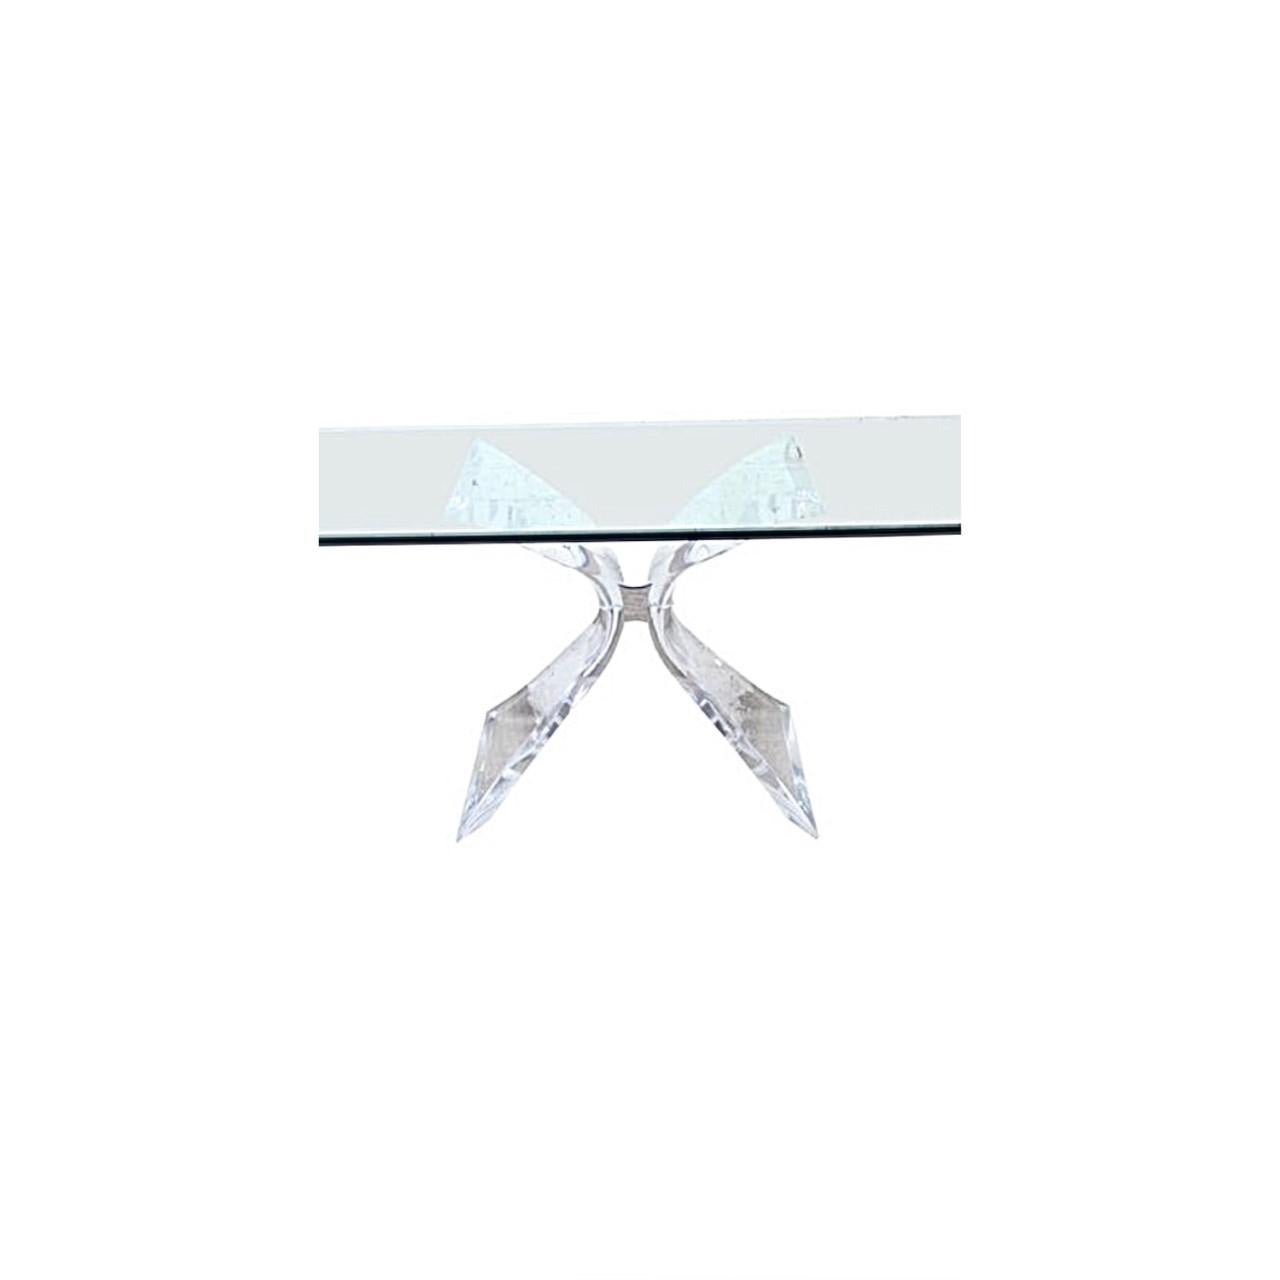 Glamourous “Butterfly” Lucite dining table with square glass top by Lion in Frost. Created of Lucite and resembling butterfly wings, this table is sculptural. The wings are connected thru a chrome-plated metal center. This piece is signed and a